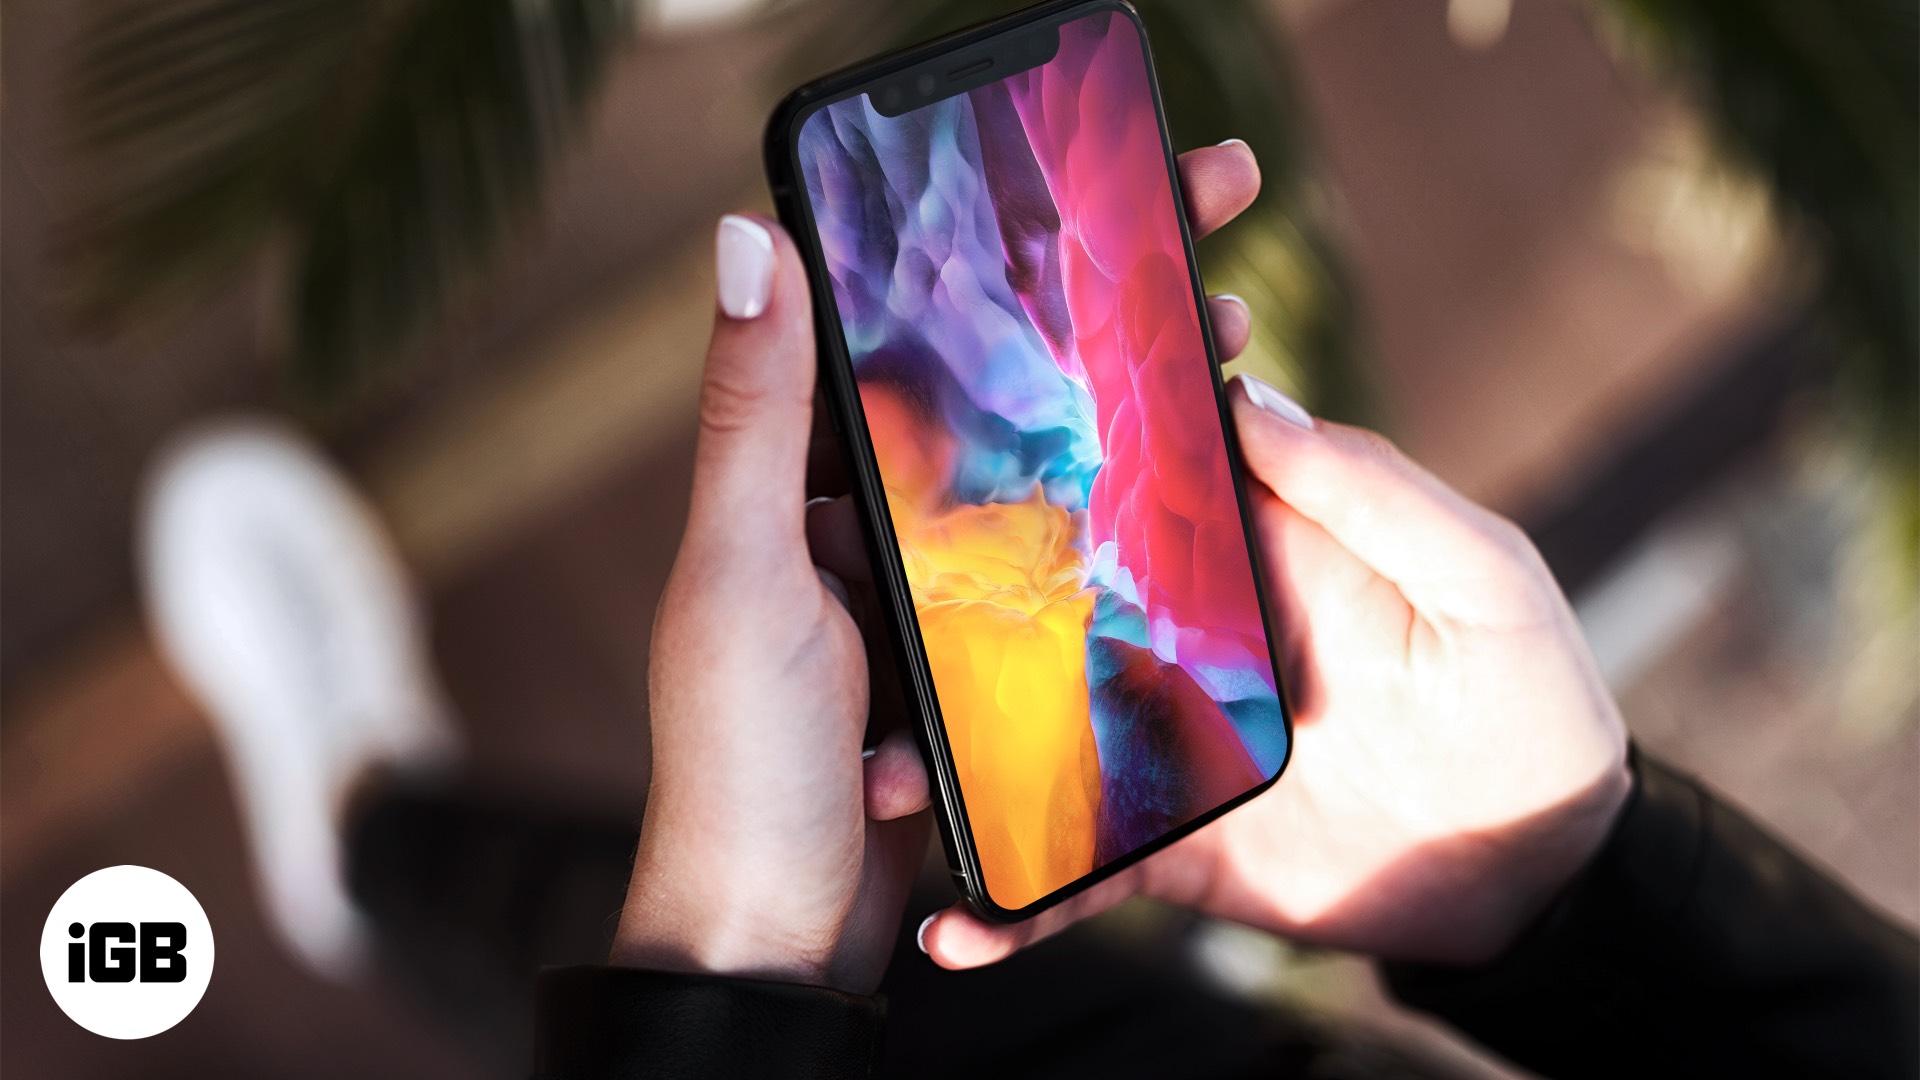 Download 2020 Ipad Pro Wallpapers - Mockup Iphone 11 Free , HD Wallpaper & Backgrounds